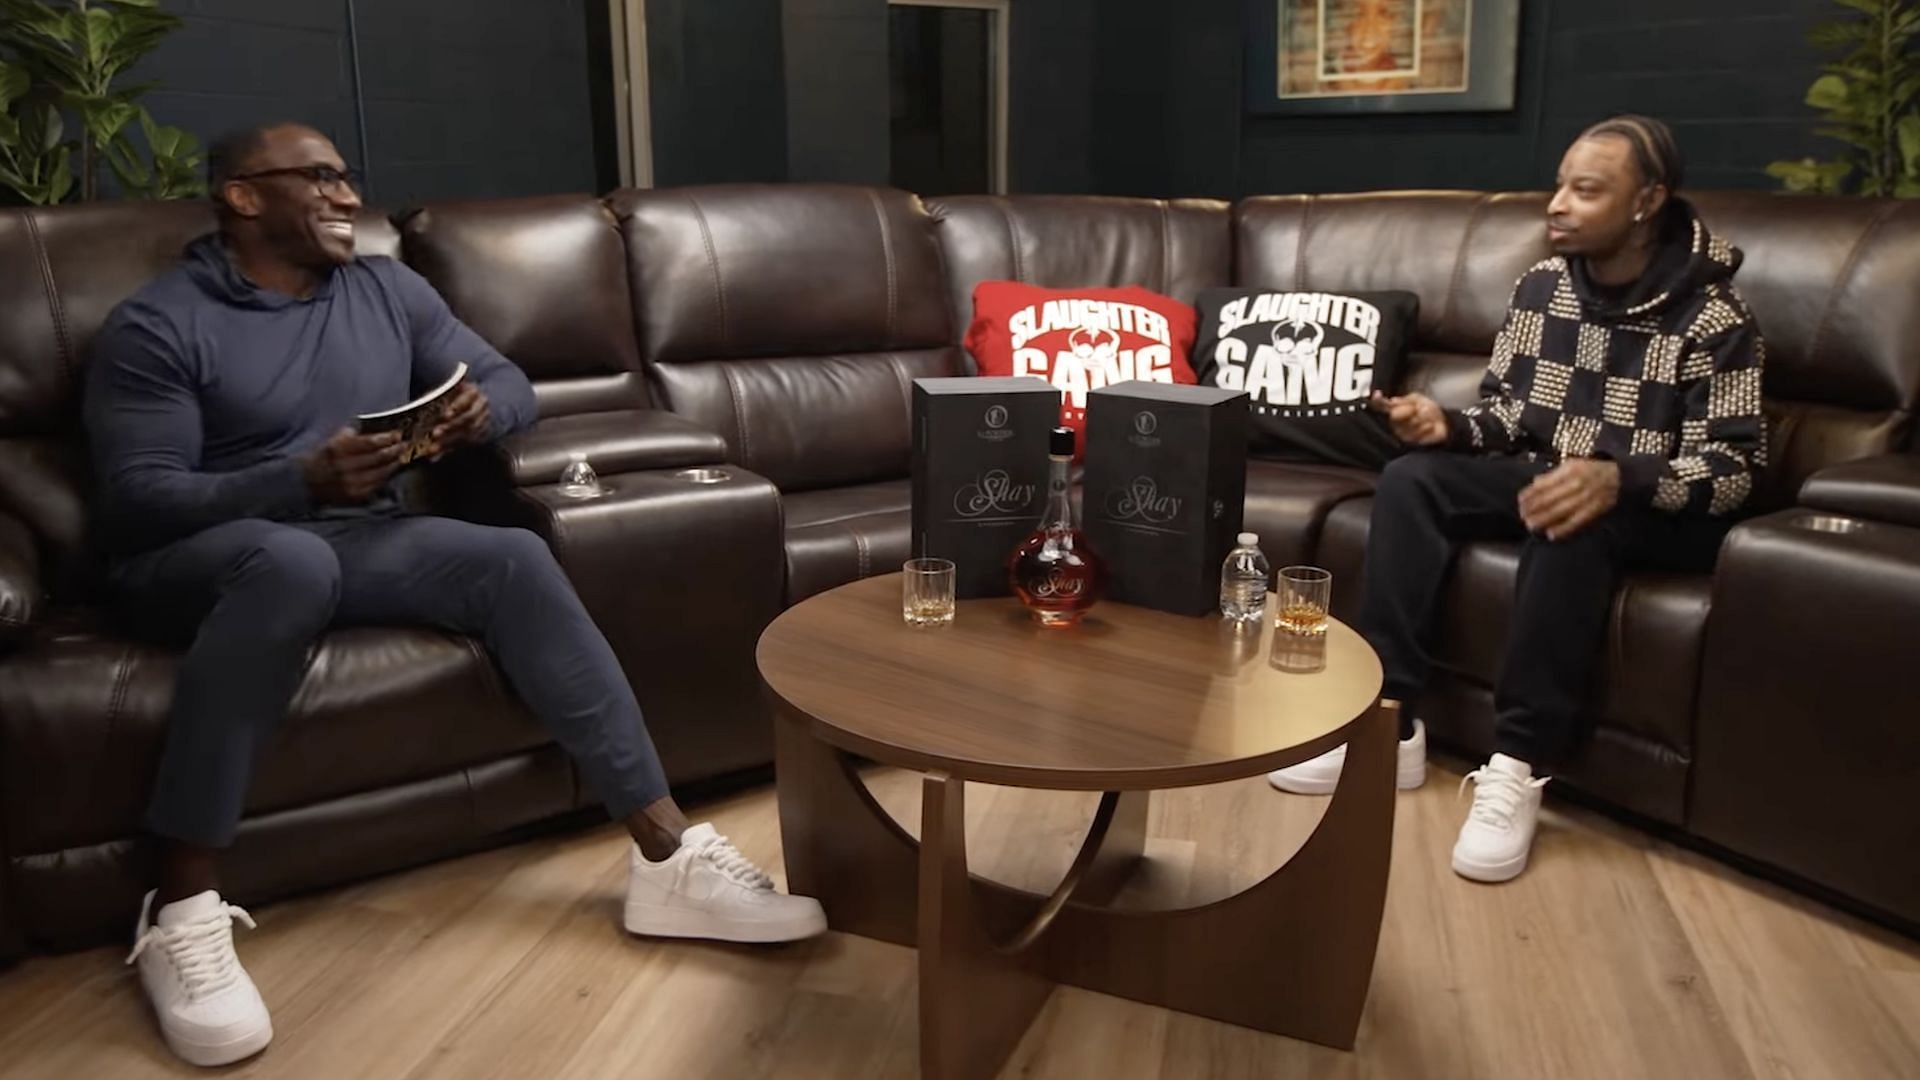 21 Savage and Shannon Sharpe engaged in a conversation about his childhood (Image via YouTube/@ClubShayShay)